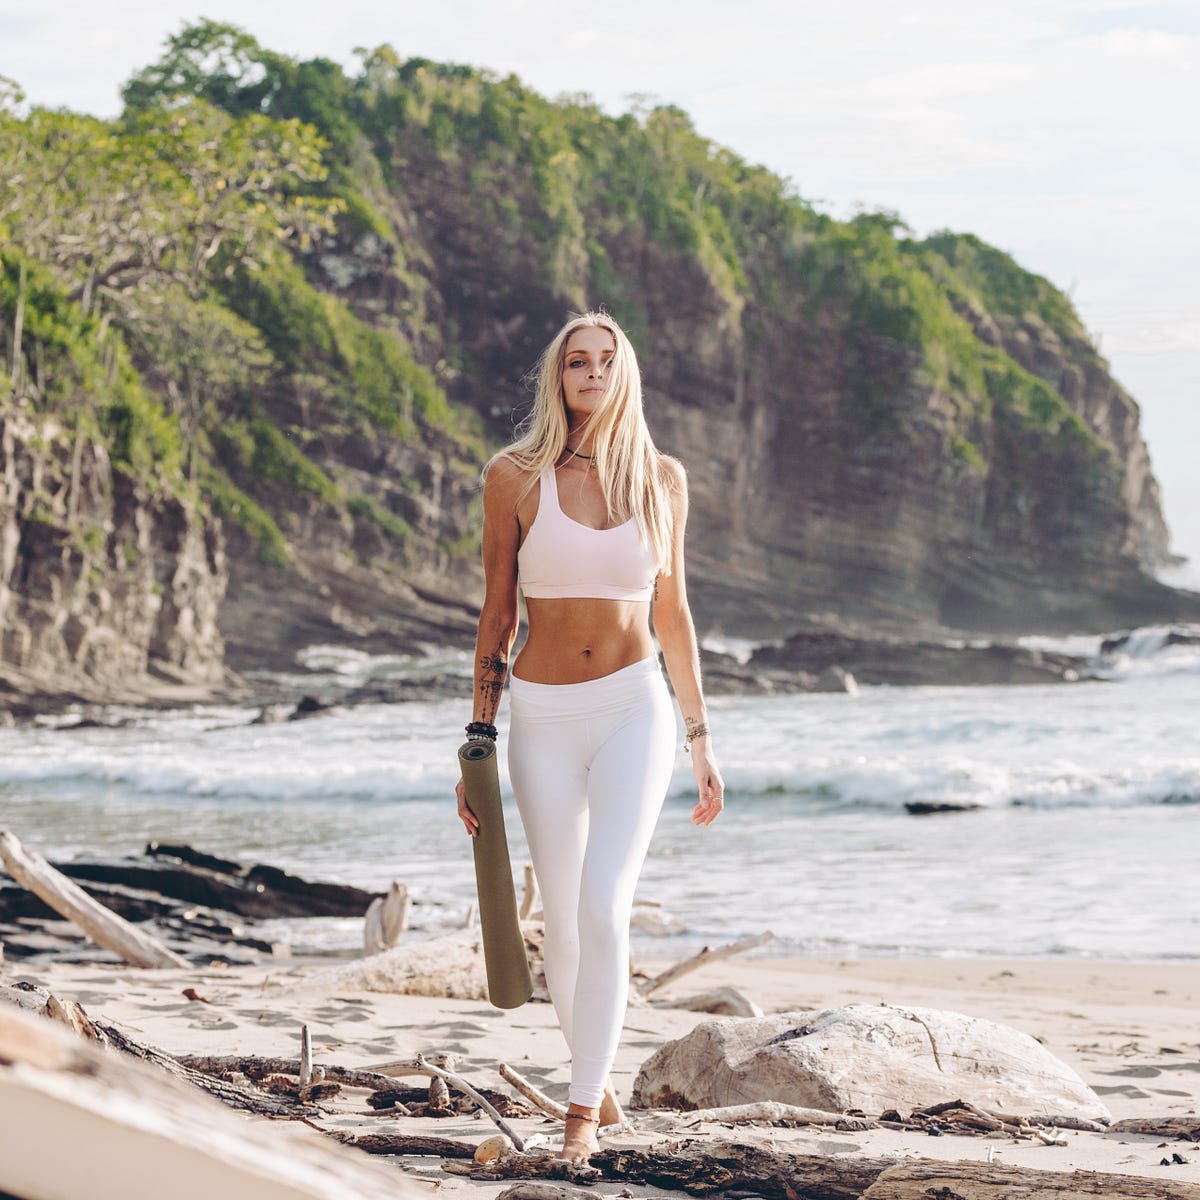 Women In Wellness: Juliana Spicoluk of Boho Beautiful on the Five Lifestyle  Tweaks That Will Help Support People's Journey Towards Better Wellbeing, by Candice Georgiadis, Authority Magazine